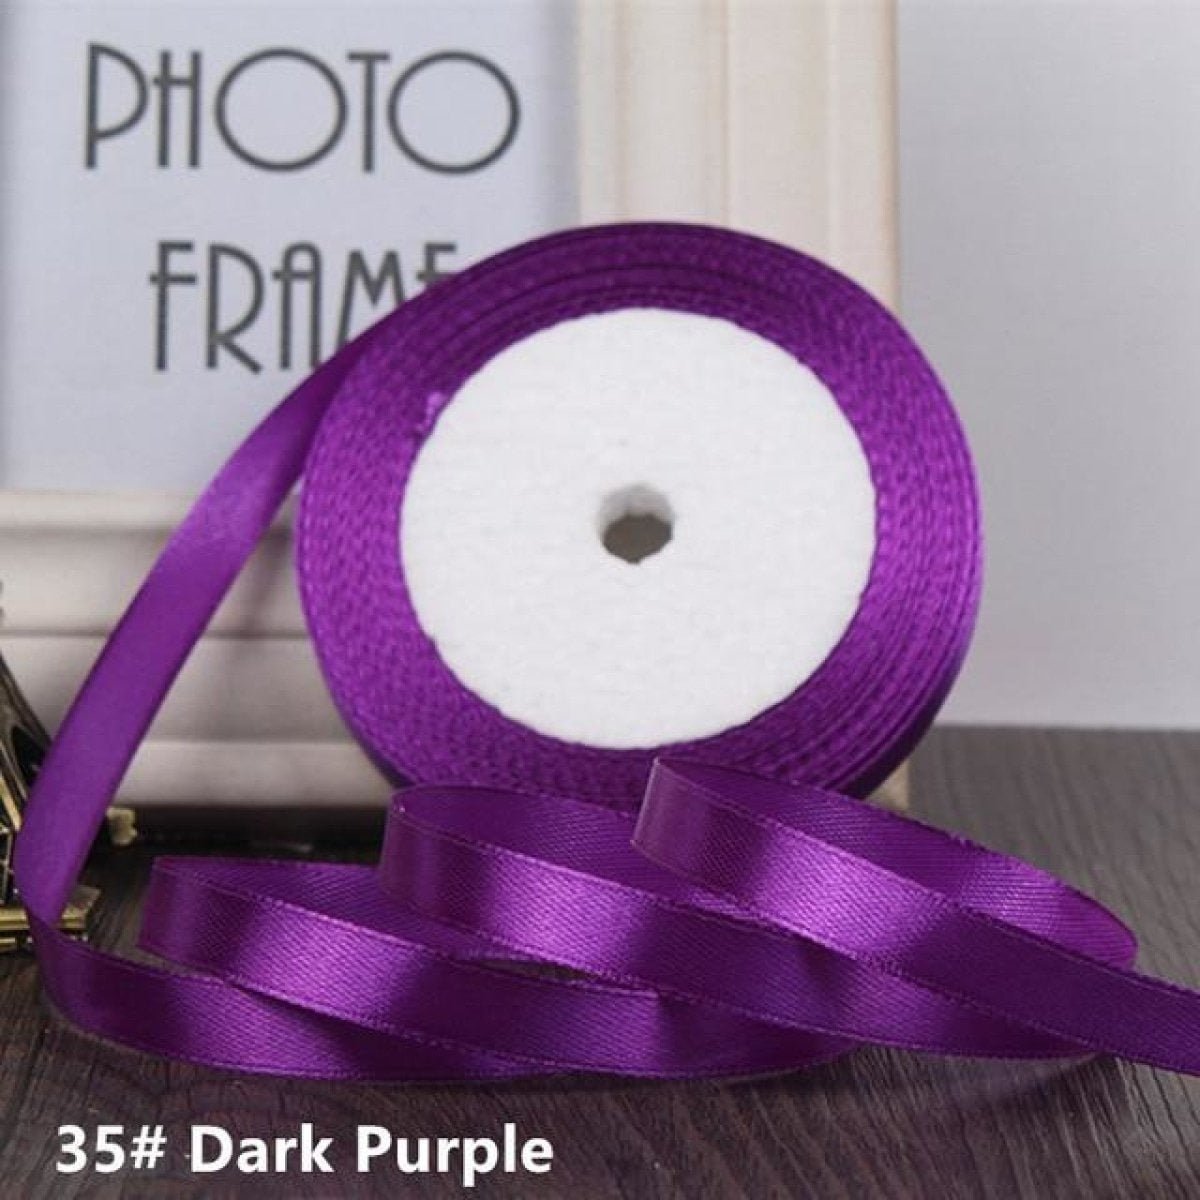 22m 10mm-15mm Polyester Ribbon for Crafts Bow Gift Wrapping Party Wedding Hair - Dark Purple 15mm - - Asia Sell